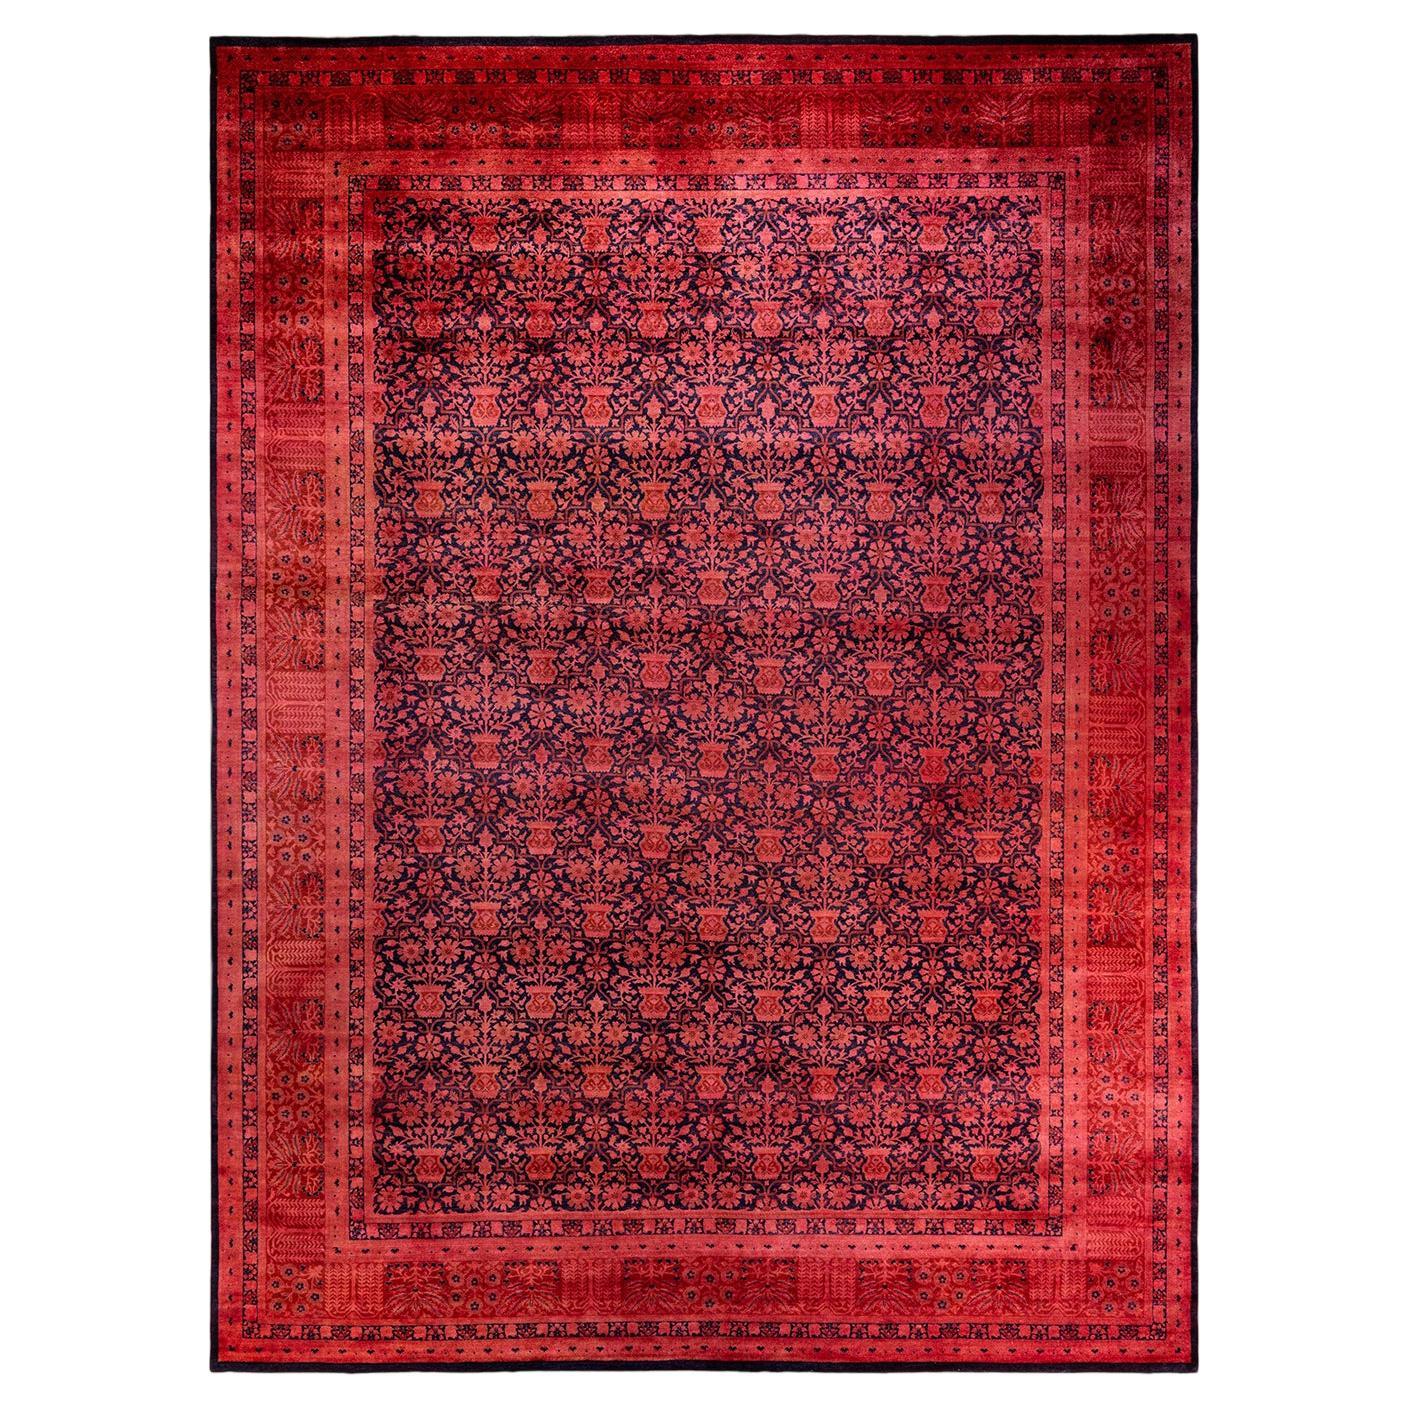 Contemporary Overdyed Hand Knotted Wool Red Area Rug